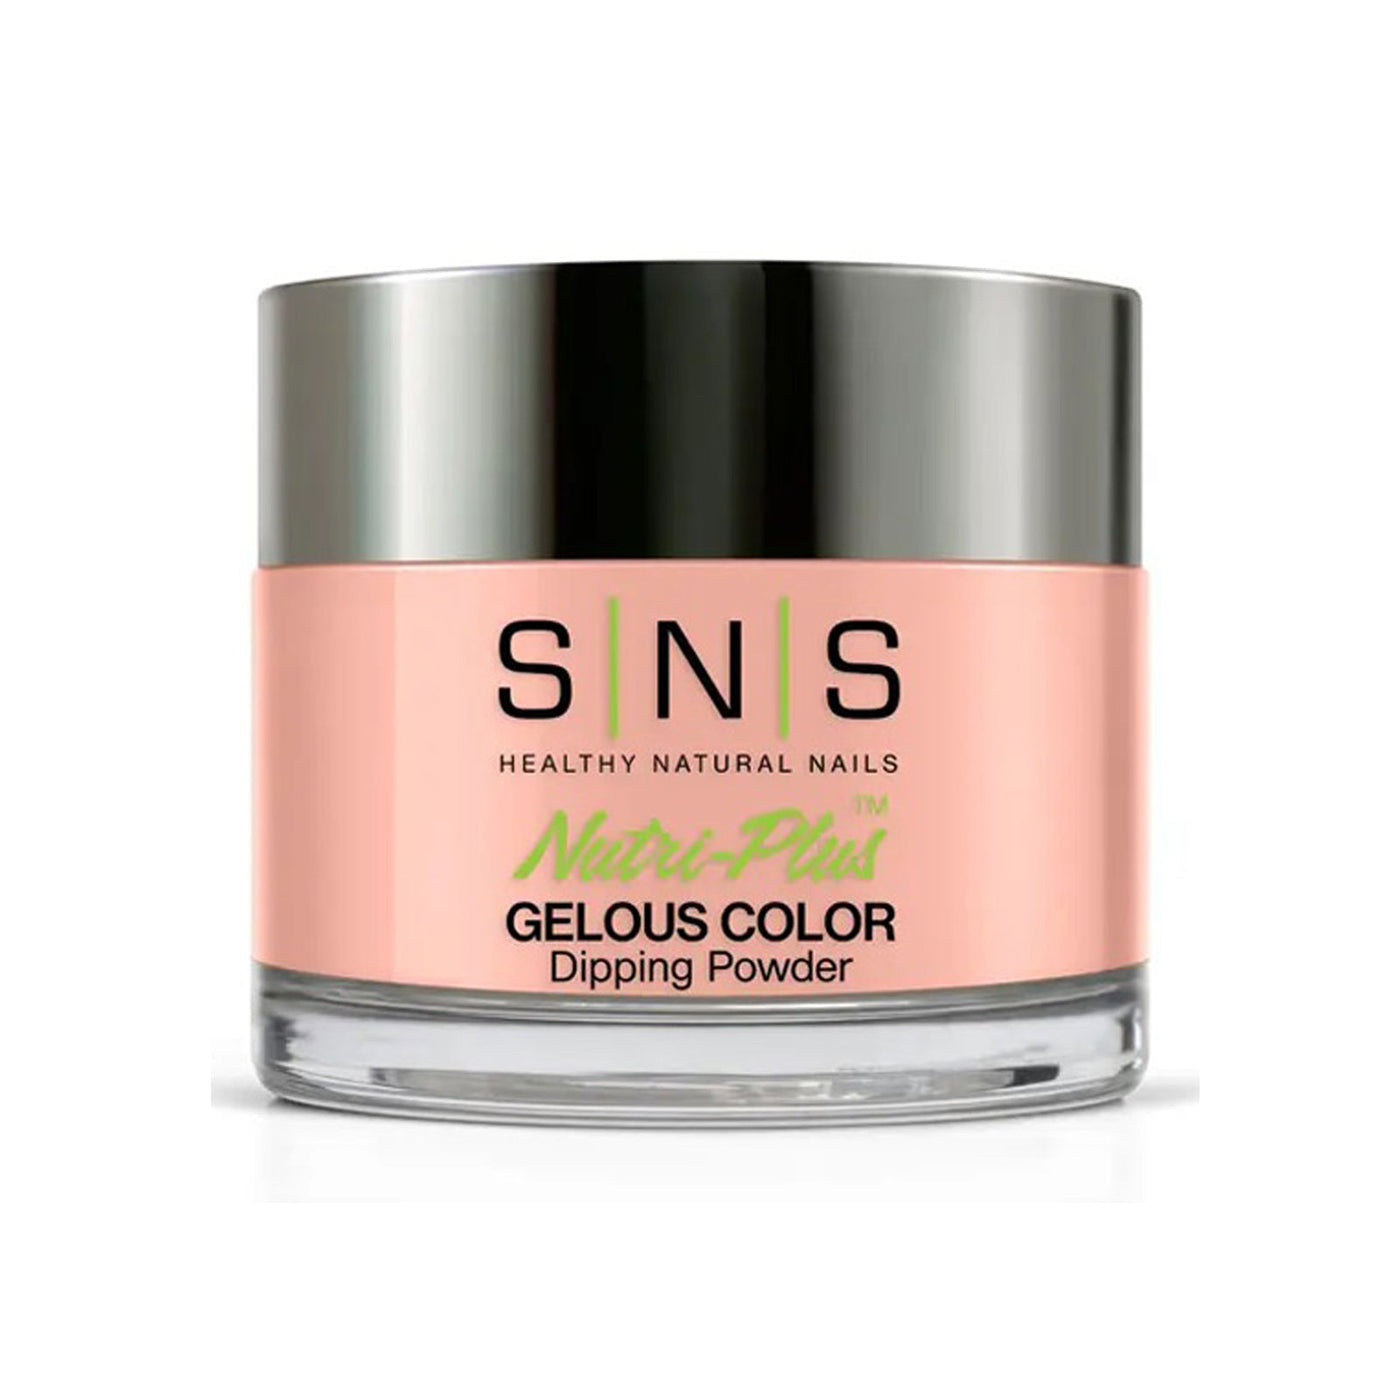 SNS Gelous Color Dipping Powder SL13 Lacy Bustier (43g) packaging